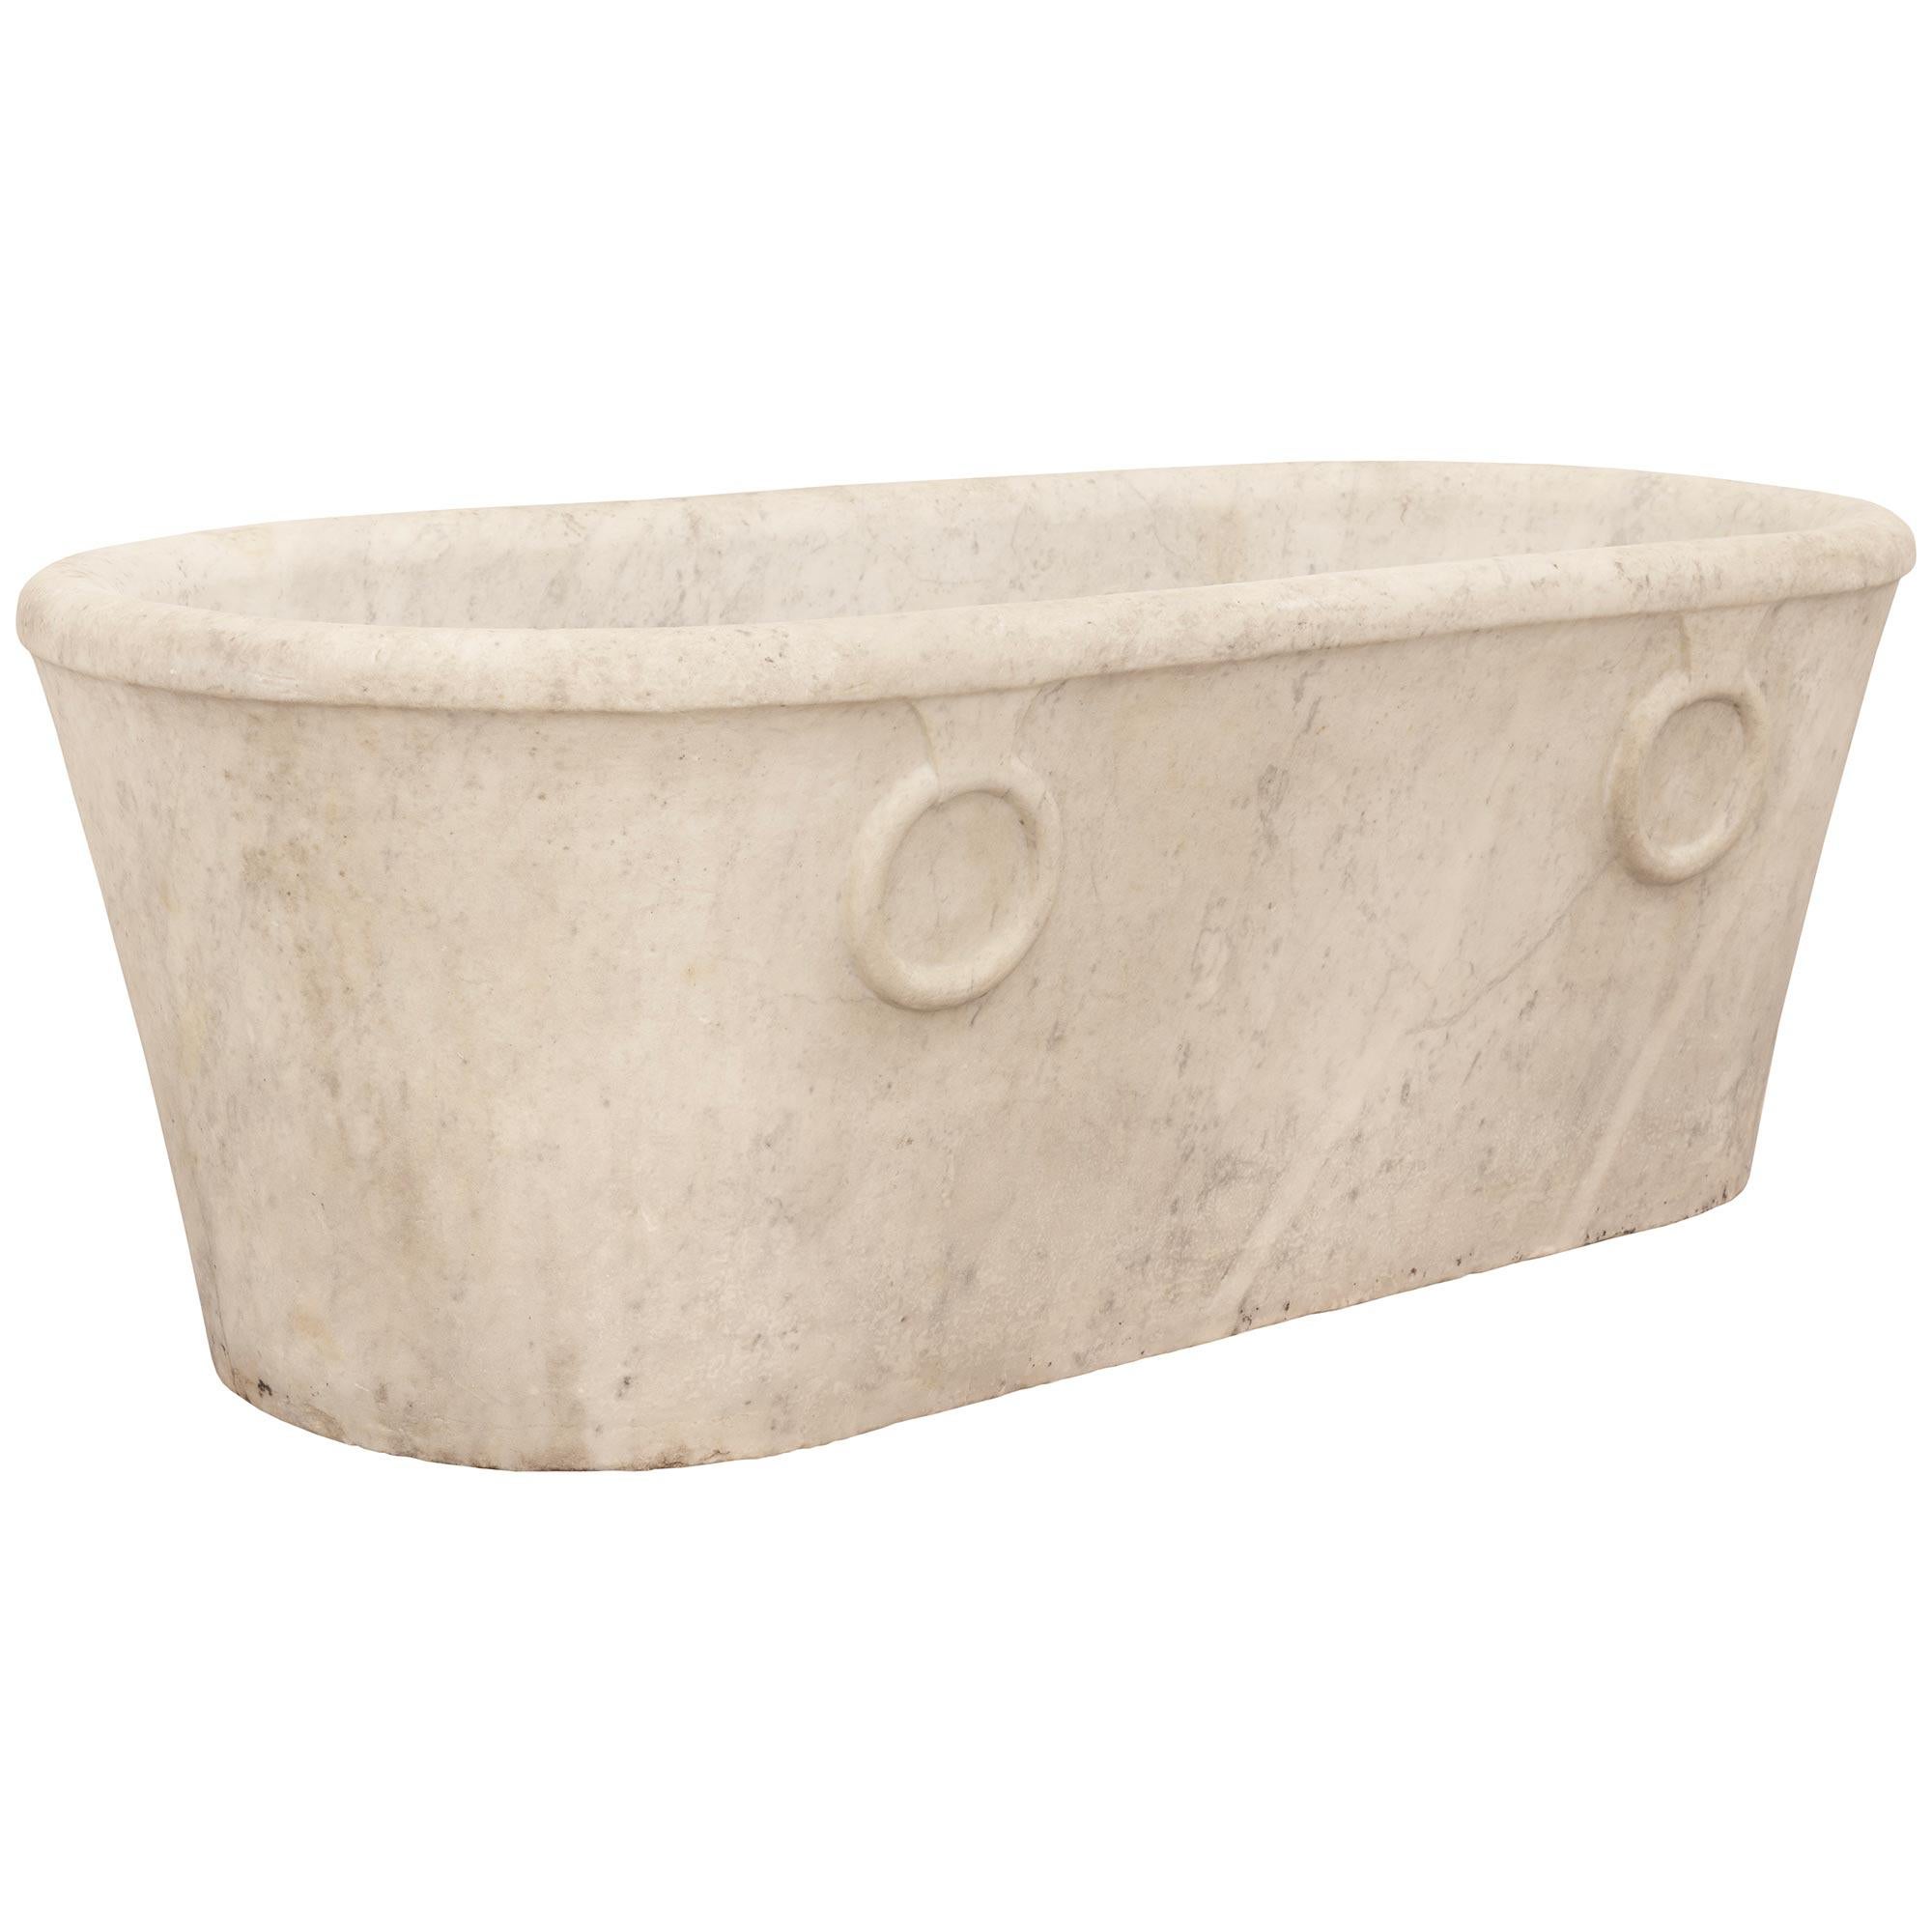 Italian 19th Century White Carrara Marble Tub/Planter In Good Condition For Sale In West Palm Beach, FL